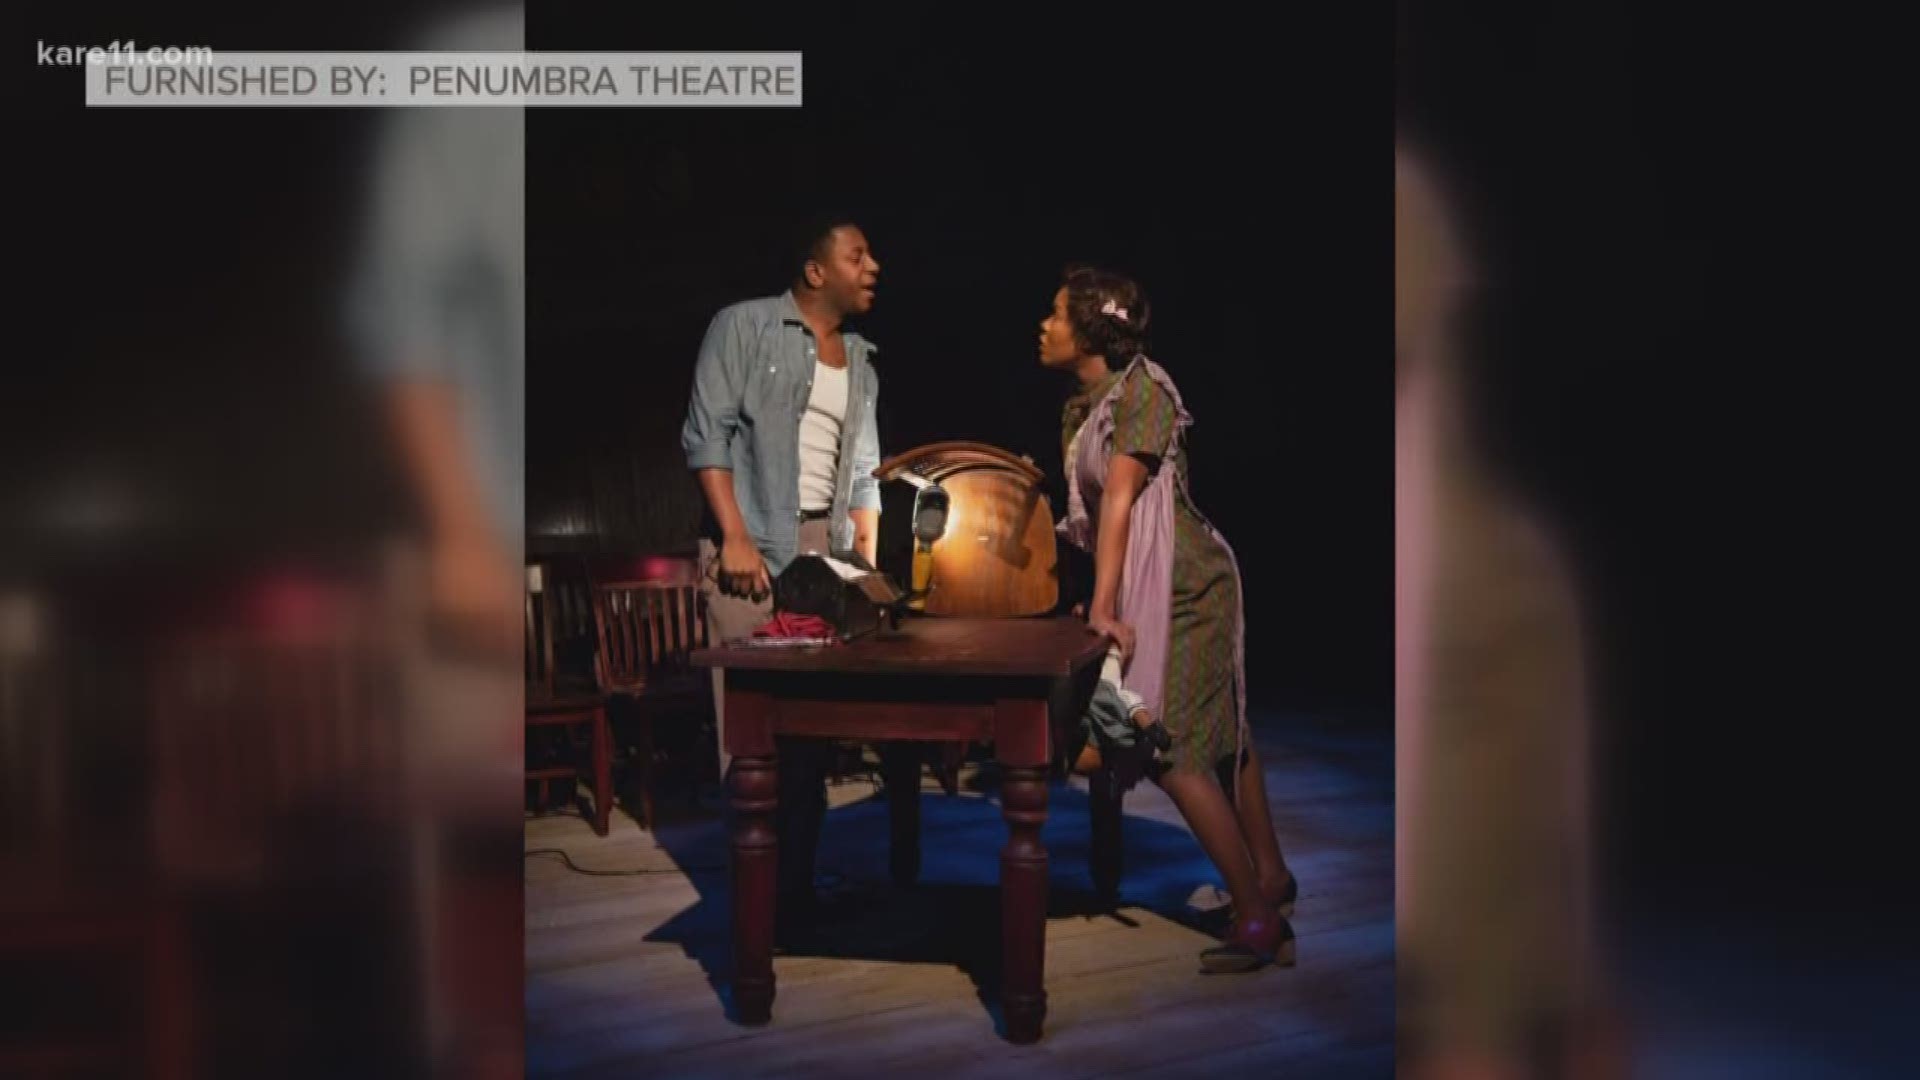 Penumbra Artistic Director, Sarah Bellamy, says the theatre is now proud to introduce the world premiere of "Benevolence," part two of the Emmett Till Trilogy. https://kare11.tv/2E8vWh2